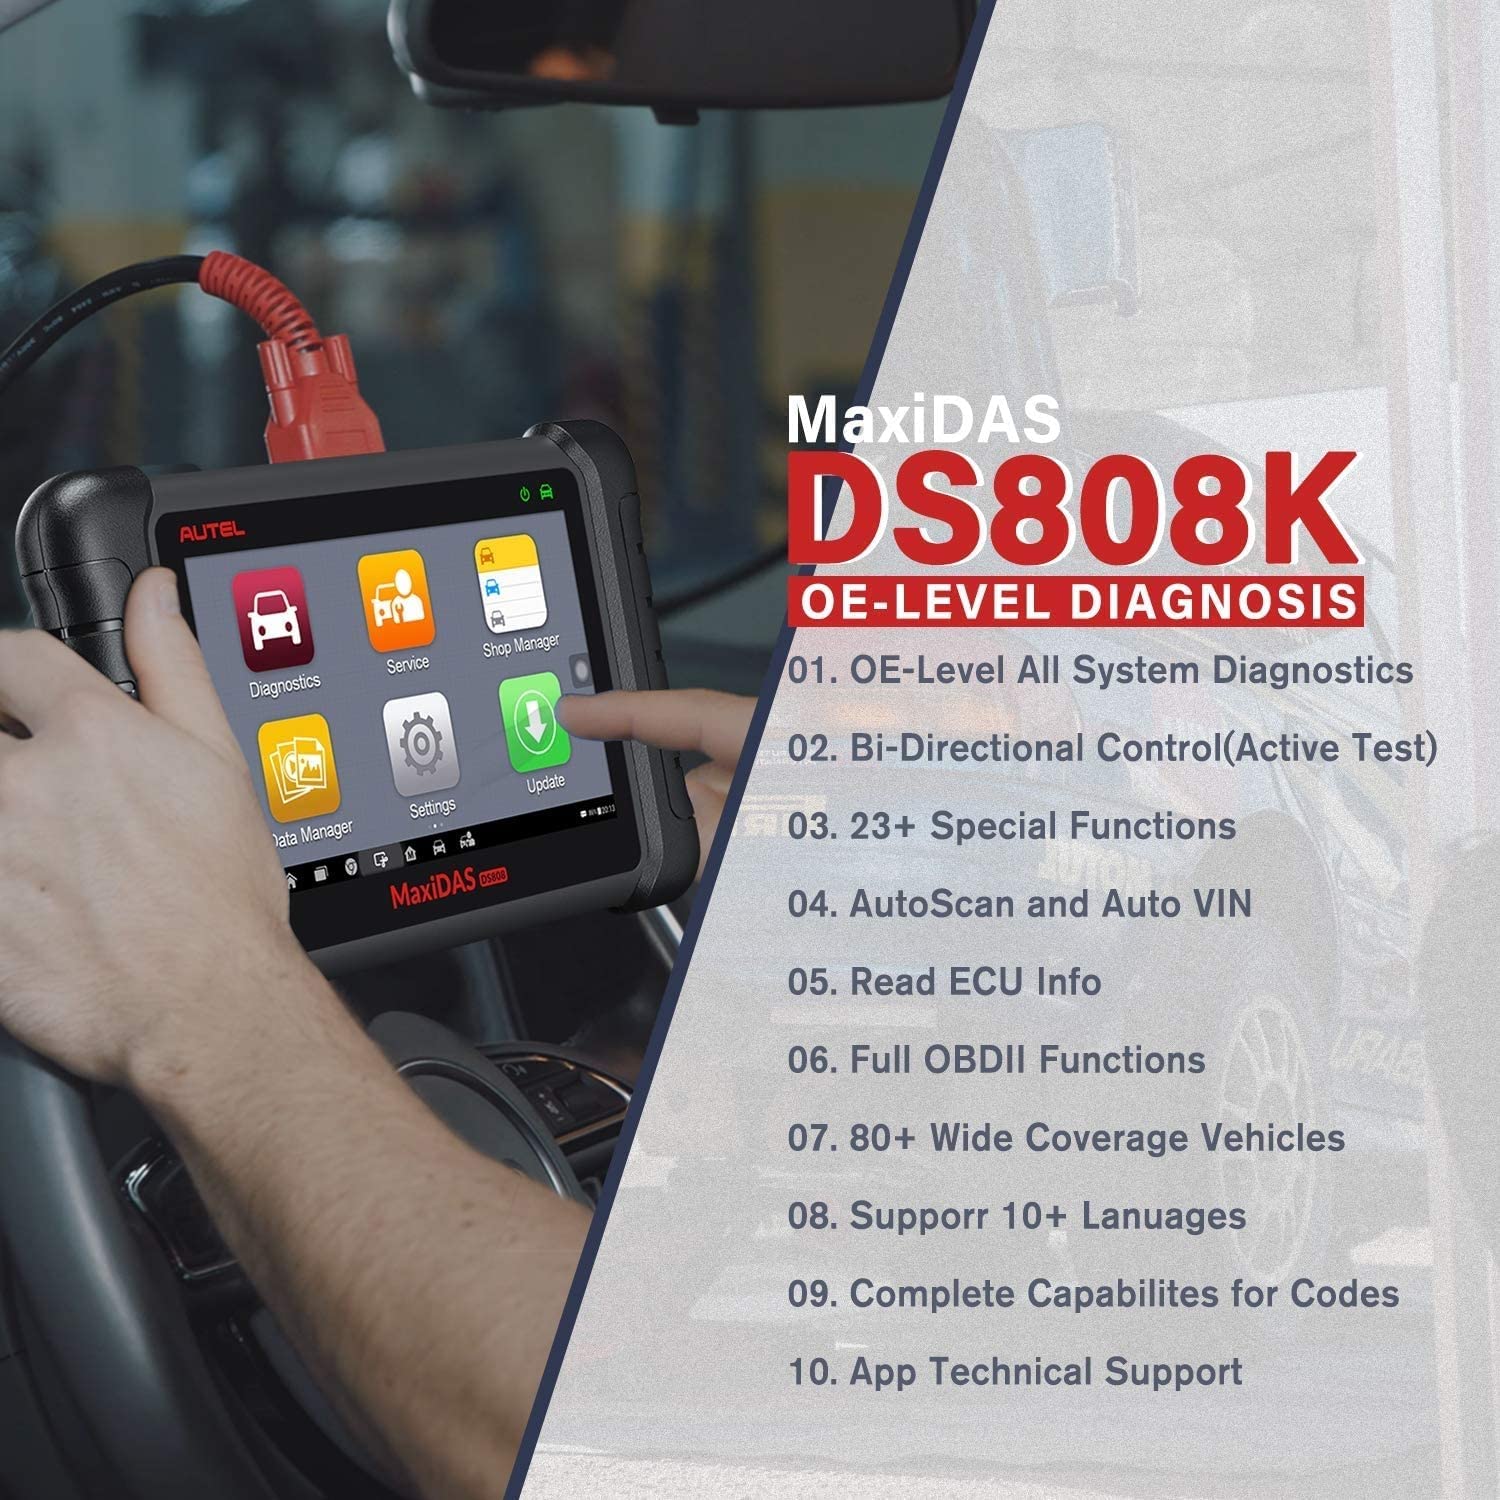 Autel MaxiDAS DS808K is OE-Level  all system diagnostic tool